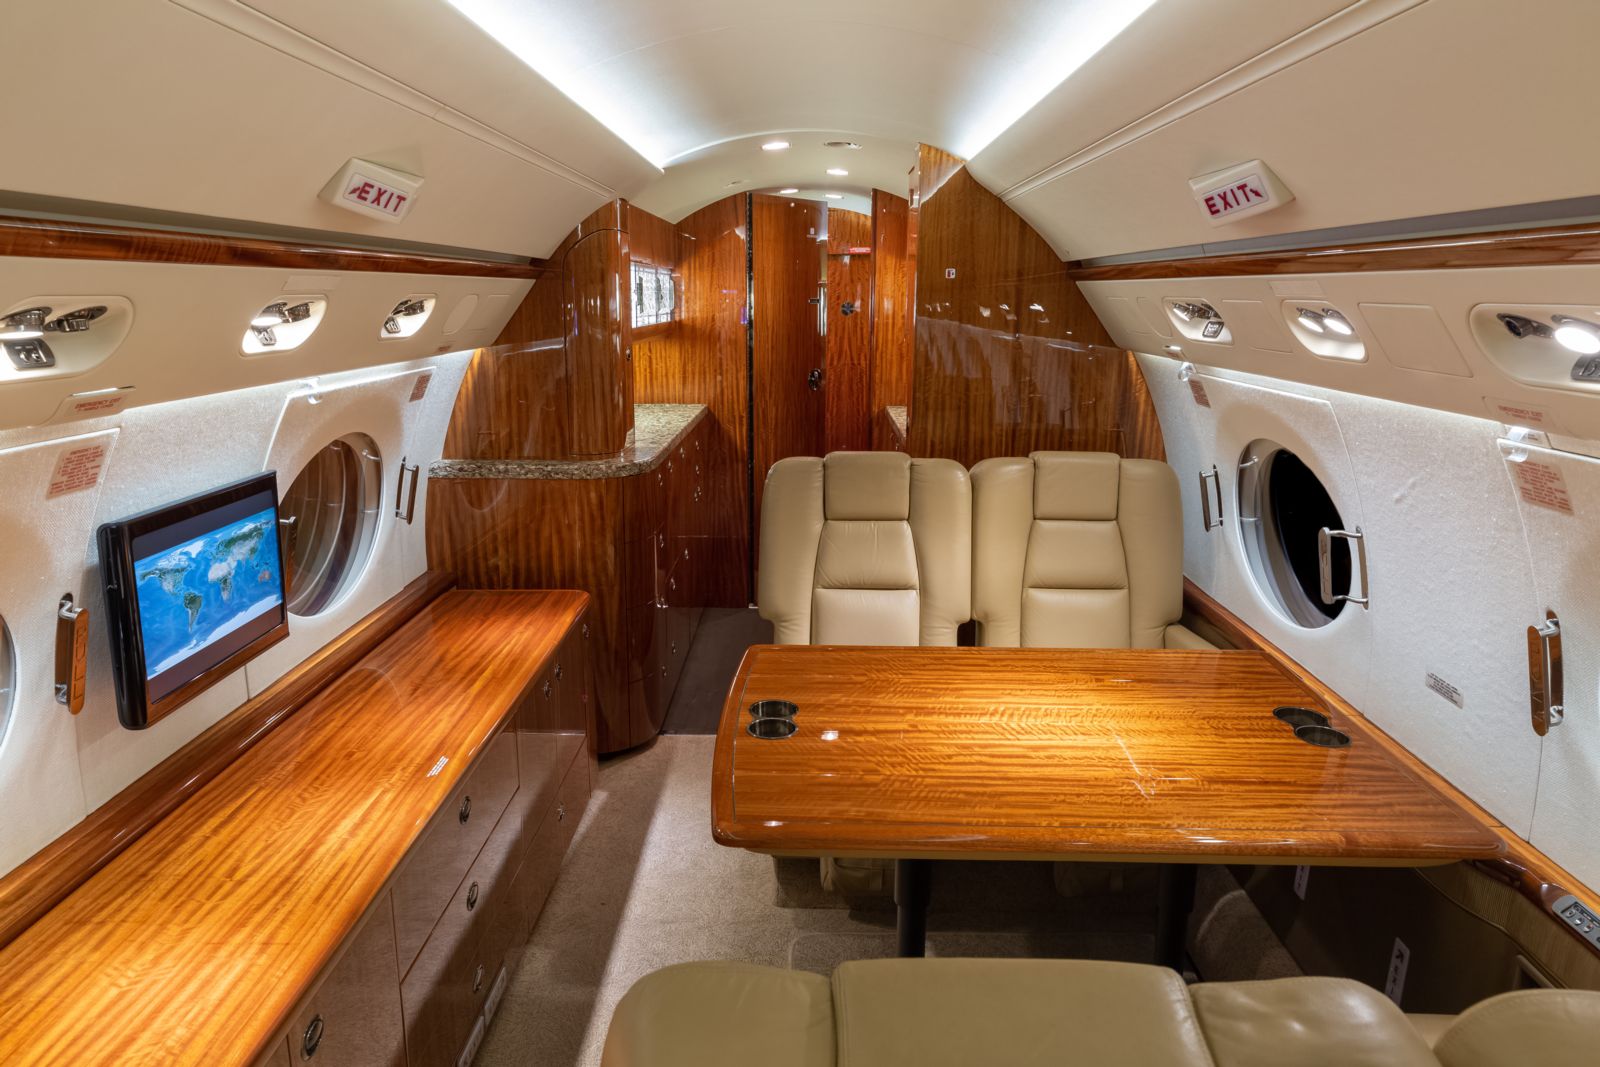 Gulfstream G550  S/N 5403 for sale | gallery image: /userfiles/images/G550_sn5403/aft%20aft.jpg